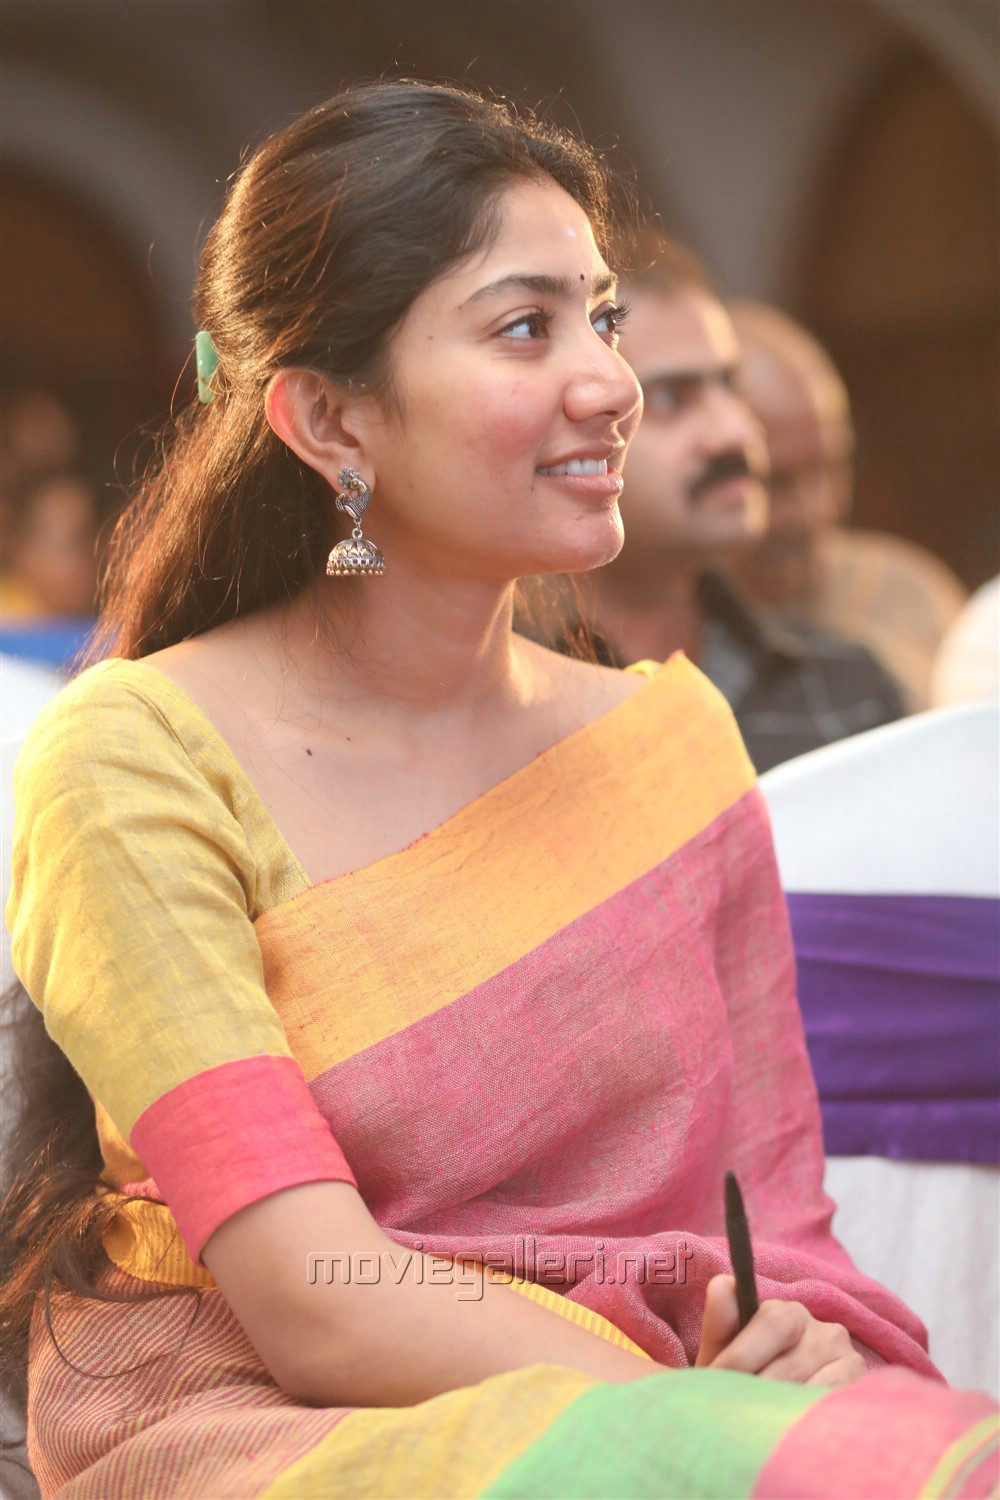 Being Sai Pallavi: Actor on Love Story, stardom, turning down roles and more